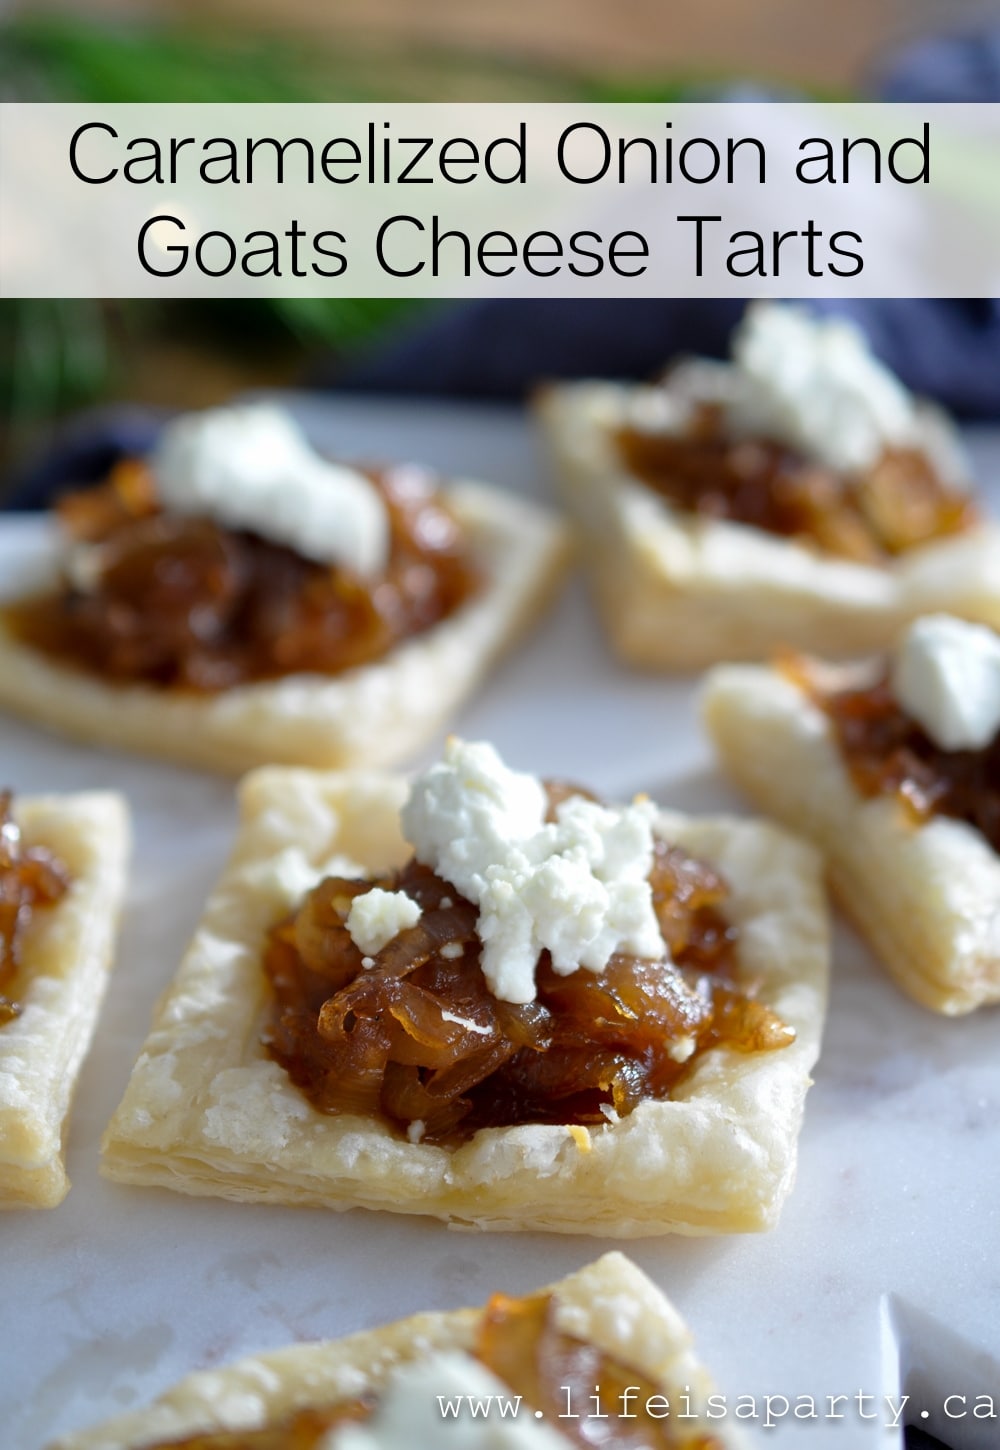 Caramelized Onion and Goats Cheese Tarts: an easy and delicious appetizer for entertaining.